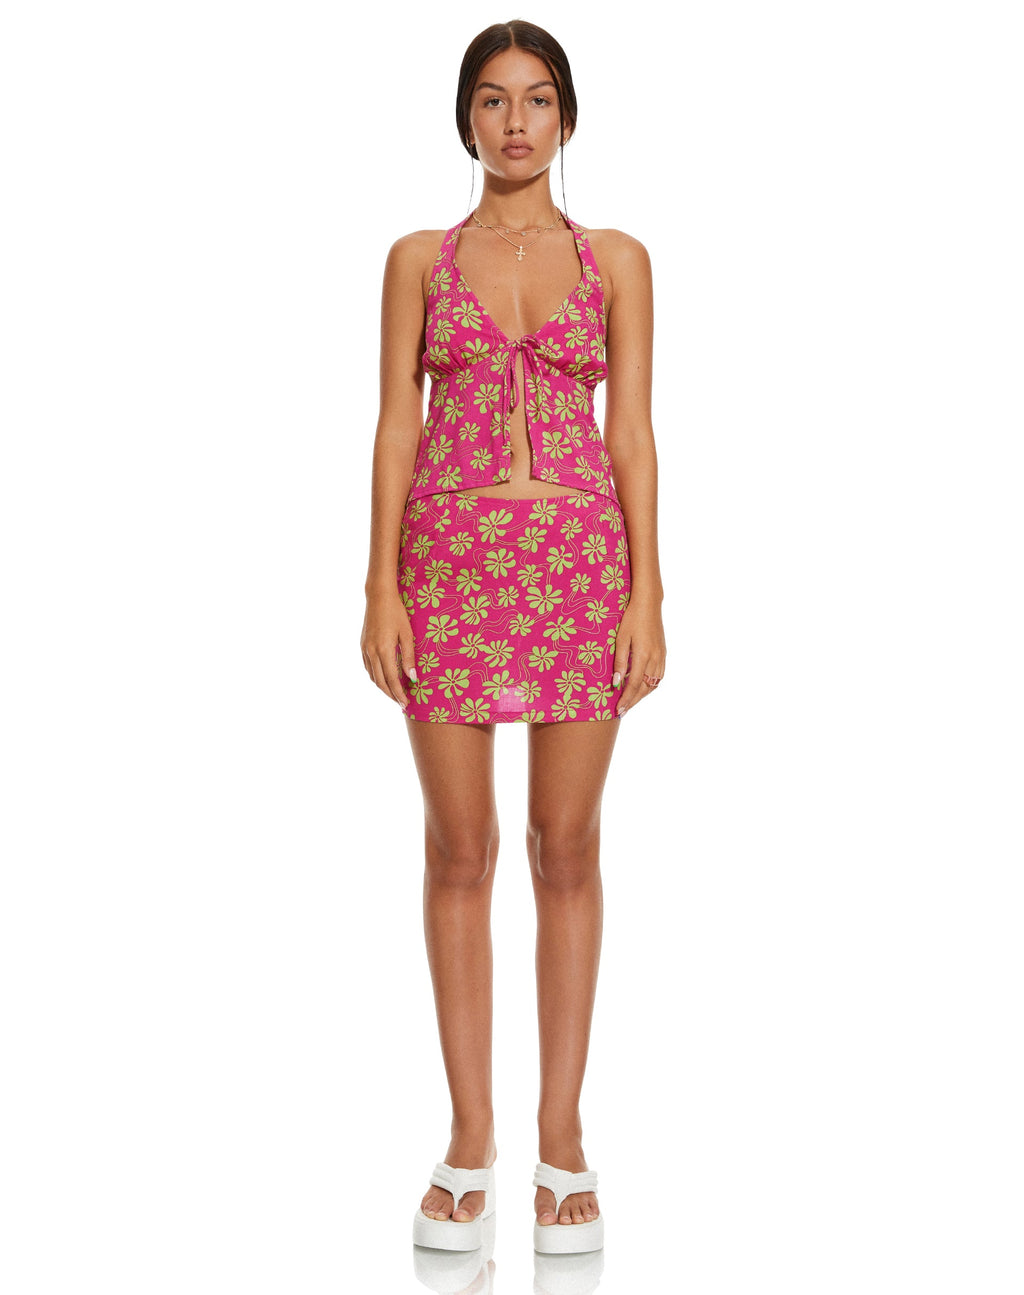 MOTEL X BARBARA Roula Top in 90s Beachy Floral Hot Pink